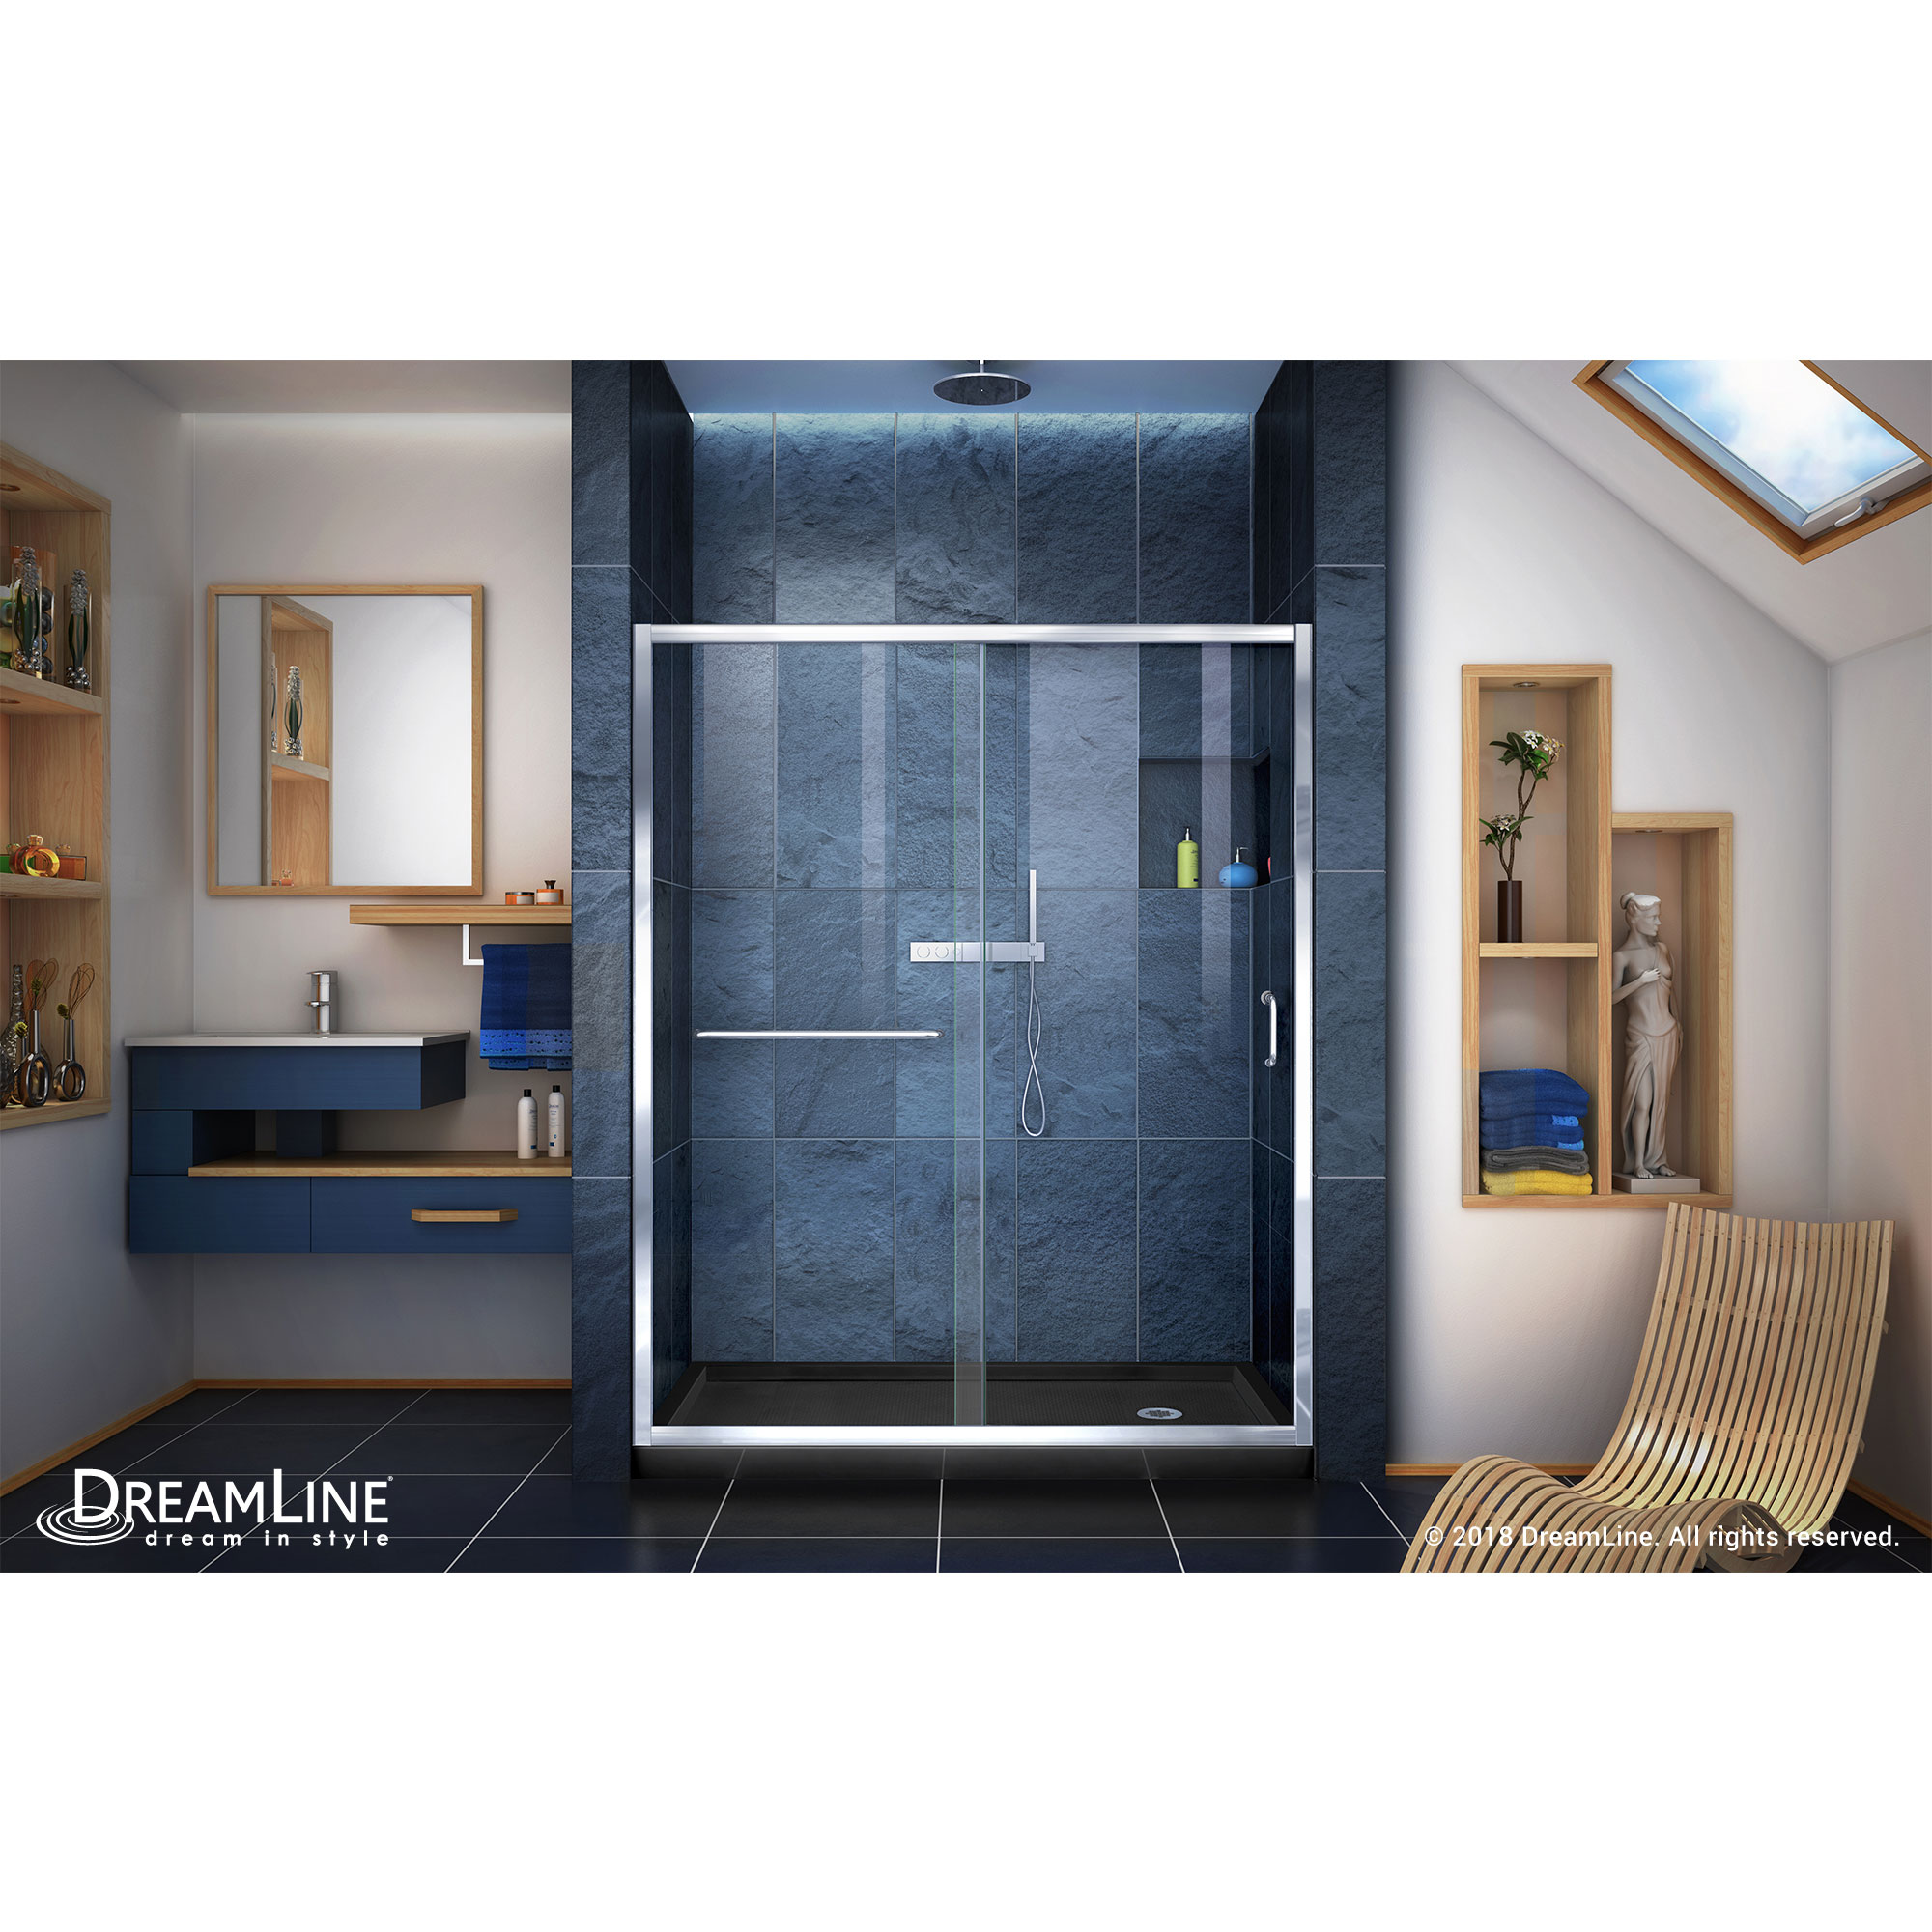 DreamLine Infinity-Z 36 in. D x 60 in. W x 74 3/4 in. H Clear Sliding Shower Door in Chrome and Right Drain Black Base